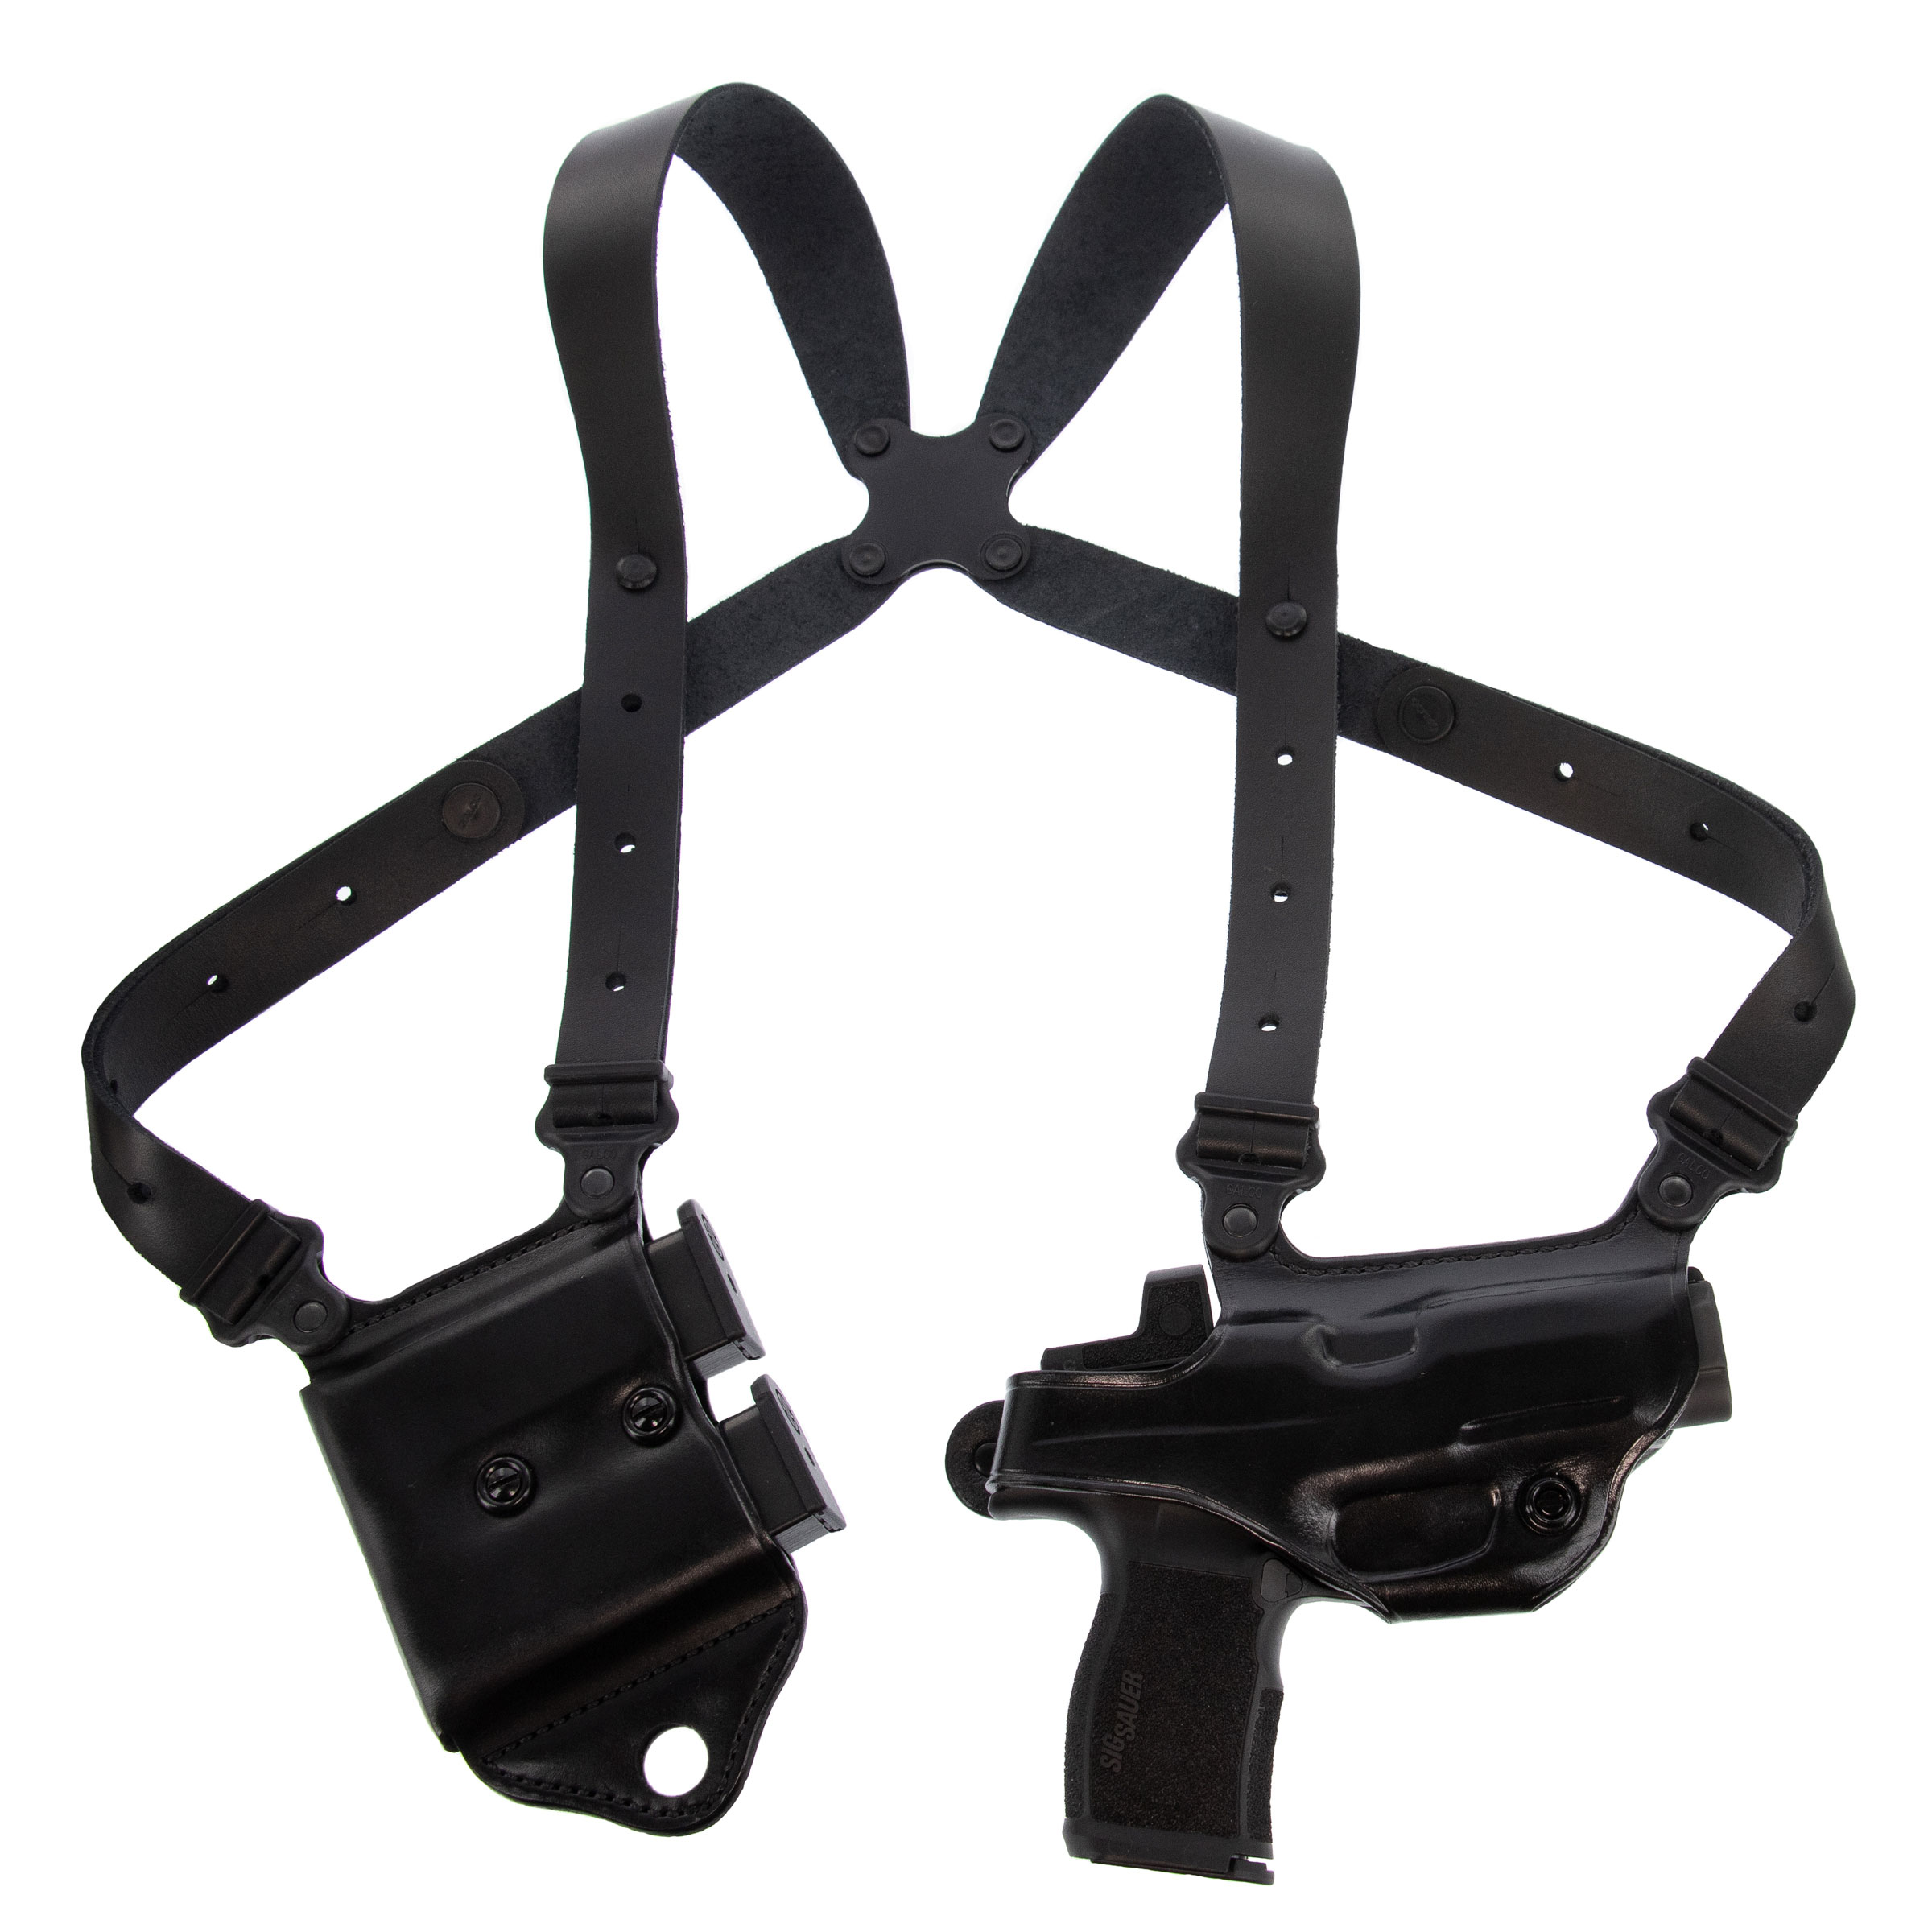 Galco Miami Classic II Shoulder Holster System MCII224 for Glock 17/19 RH 